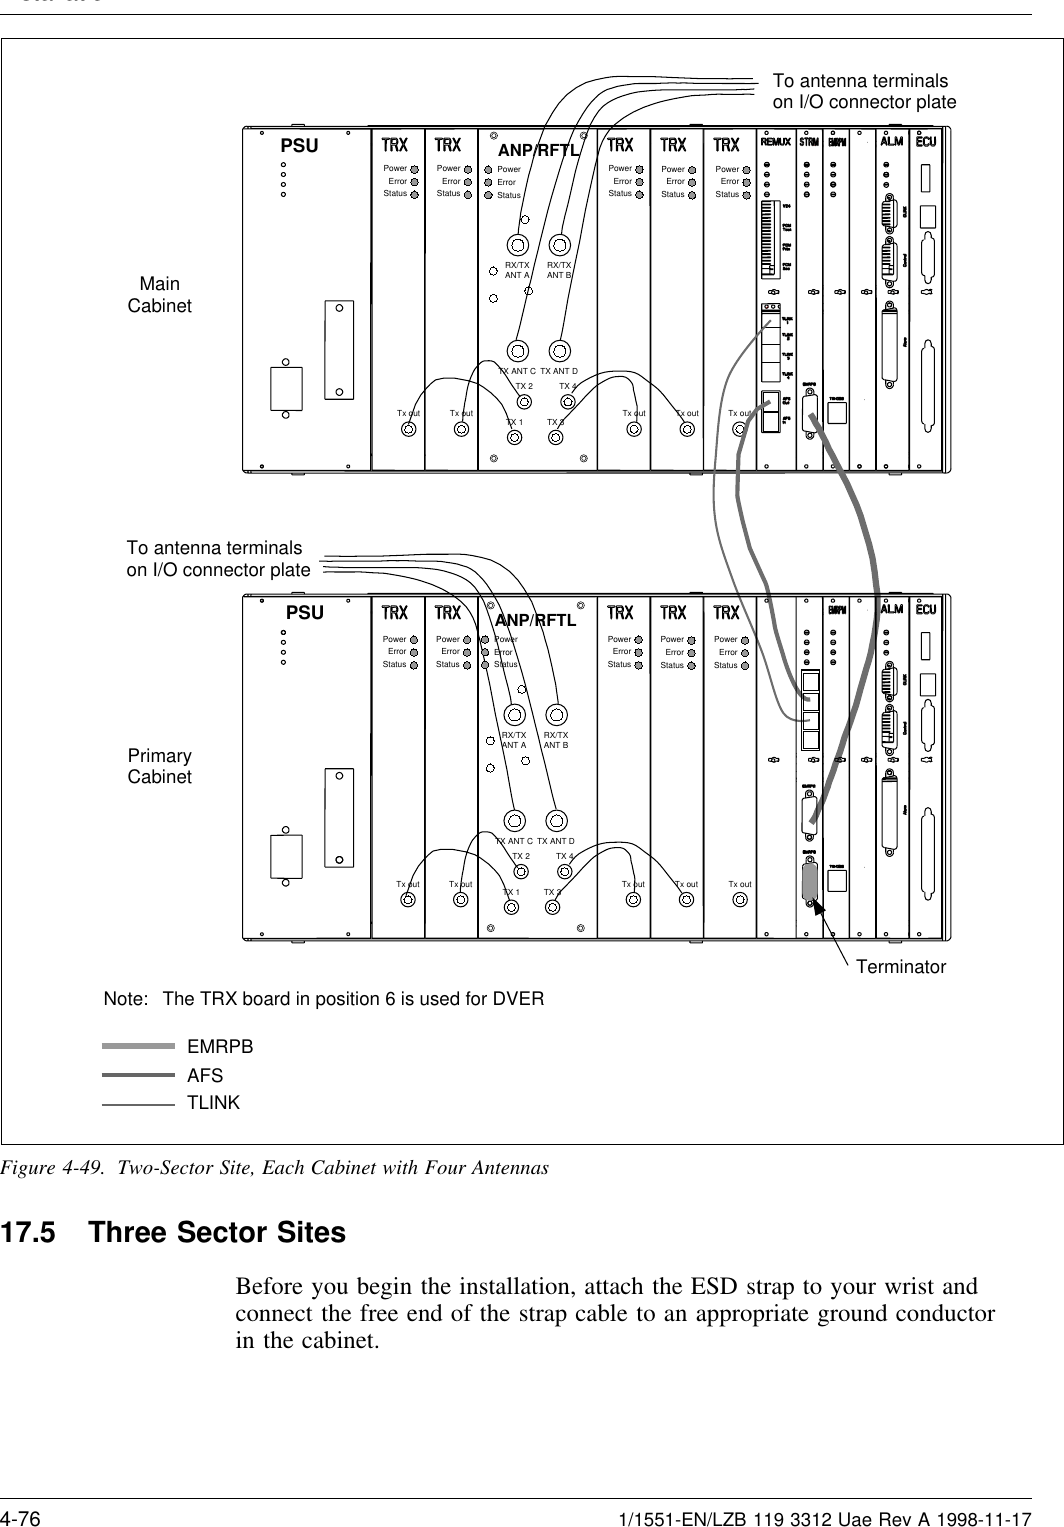 InstallationPowerErrorStatusPowerErrorStatusPowerErrorStatusPowerErrorStatusPowerErrorStatusTx out Tx out Tx out Tx out Tx outTo antenna terminalson I/O connector plate MainCabinetNote: The TRX board in position 6 is used for DVEREMRPBAFSTLINKPowerErrorStatusTx outPowerErrorStatusPowerErrorStatusPowerErrorStatusPowerErrorStatusTx out Tx out Tx out Tx outTerminatorPrimaryCabinetTo antenna terminalson I/O connector plate TX 2TX 1TX 4TX 3RX/TXANT A RX/TXANT BTX ANT C TX ANT DPowerErrorStatusANP/RFTLTX 2TX 1TX 4TX 3RX/TXANT A RX/TXANT BTX ANT C TX ANT DPowerErrorStatusANP/RFTLPSUPSUFigure 4-49. Two-Sector Site, Each Cabinet with Four Antennas17.5 Three Sector SitesBefore you begin the installation, attach the ESD strap to your wrist andconnect the free end of the strap cable to an appropriate ground conductorin the cabinet.4-76 1/1551-EN/LZB 119 3312 Uae Rev A 1998-11-17